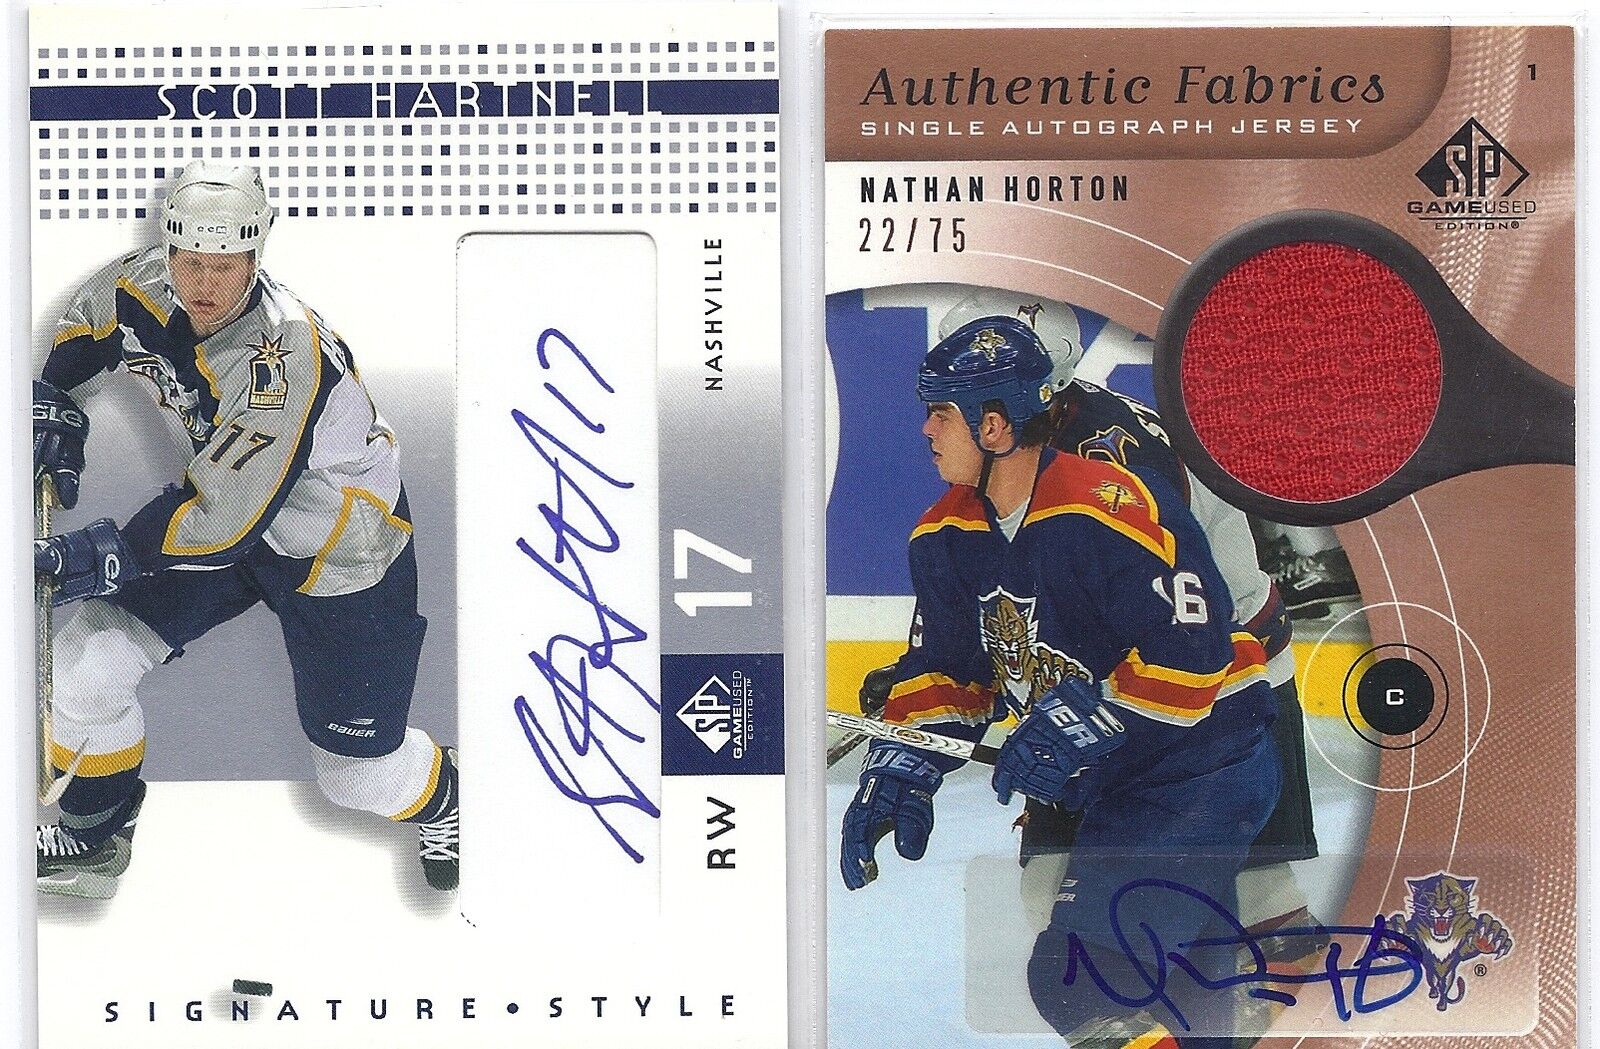 2005-06 SP Game Used Authentic Fabrics Autographs #AAFNH Nathan Horton bv $40